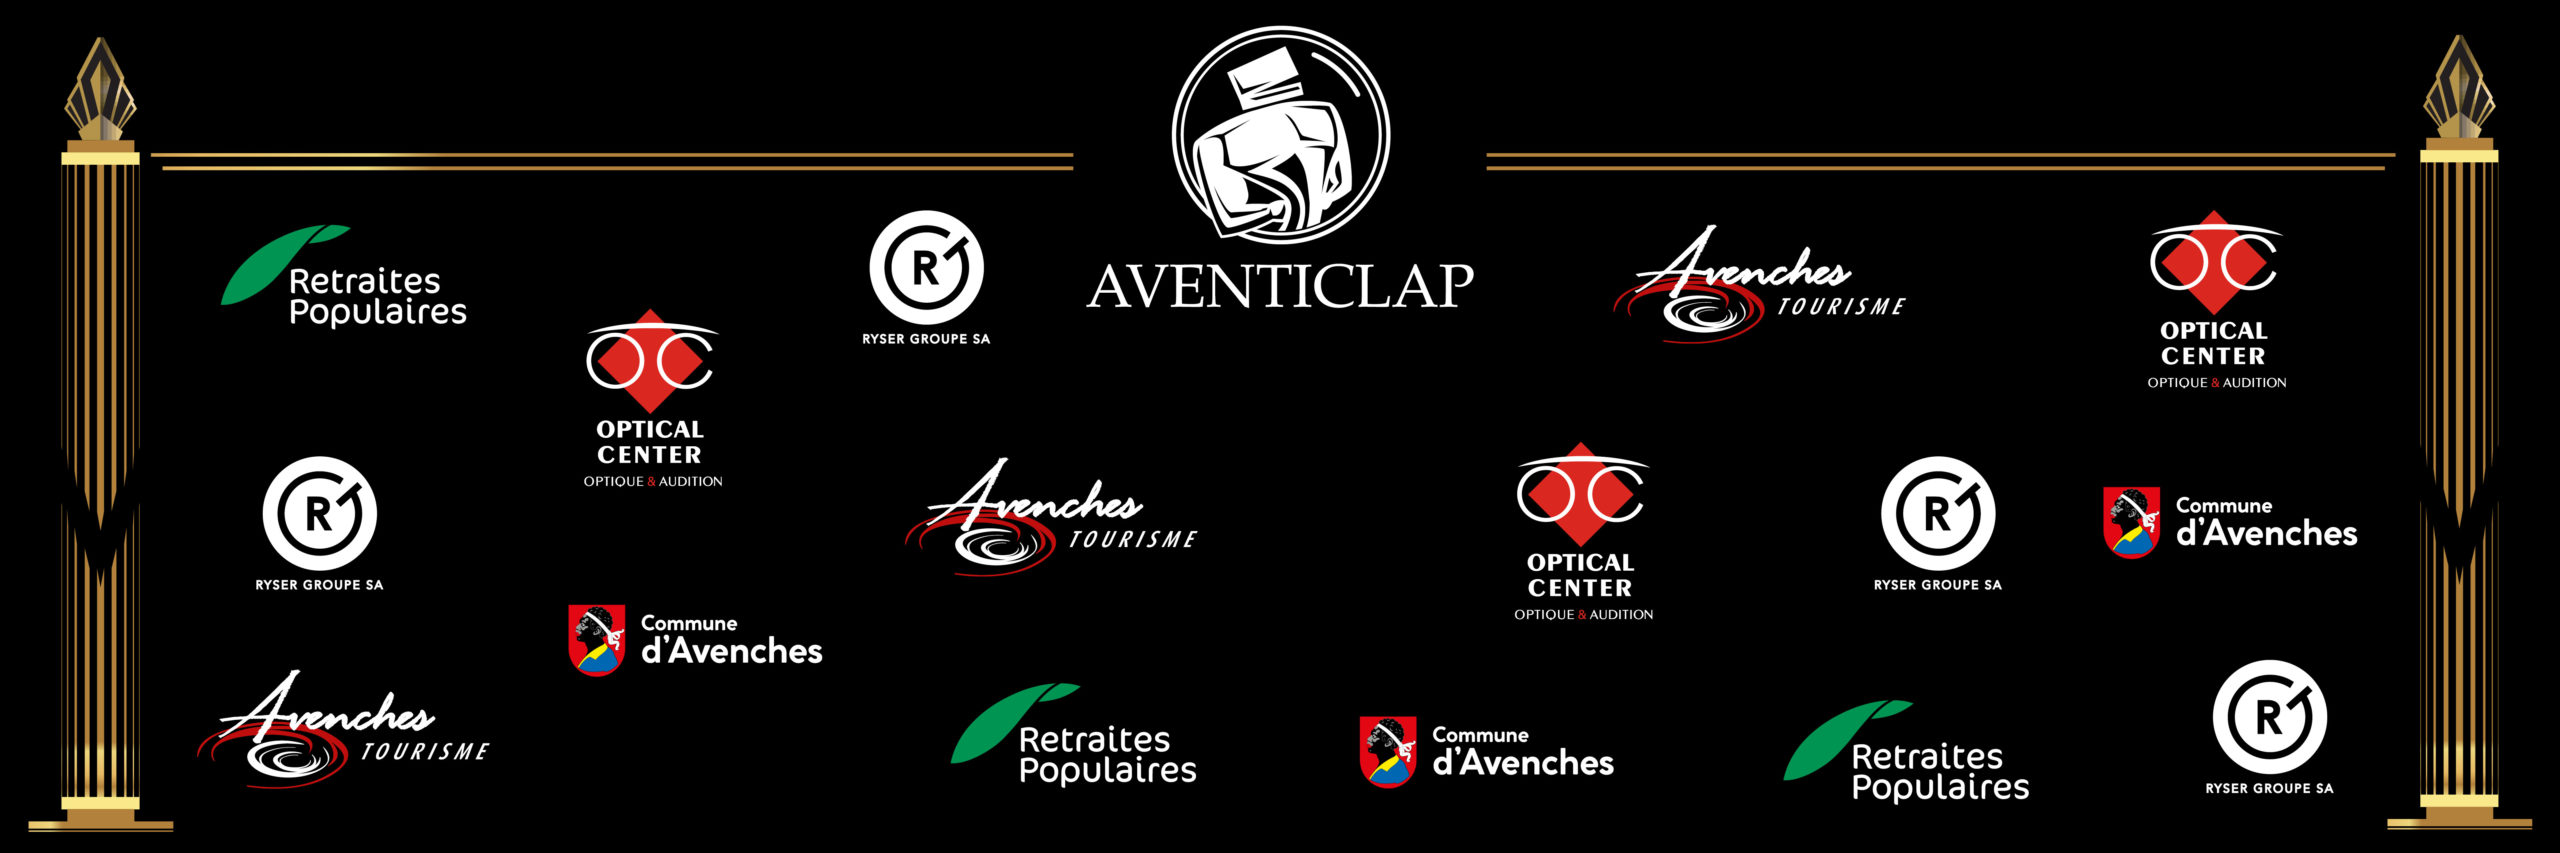 Aventiclap_Wall_of_fame